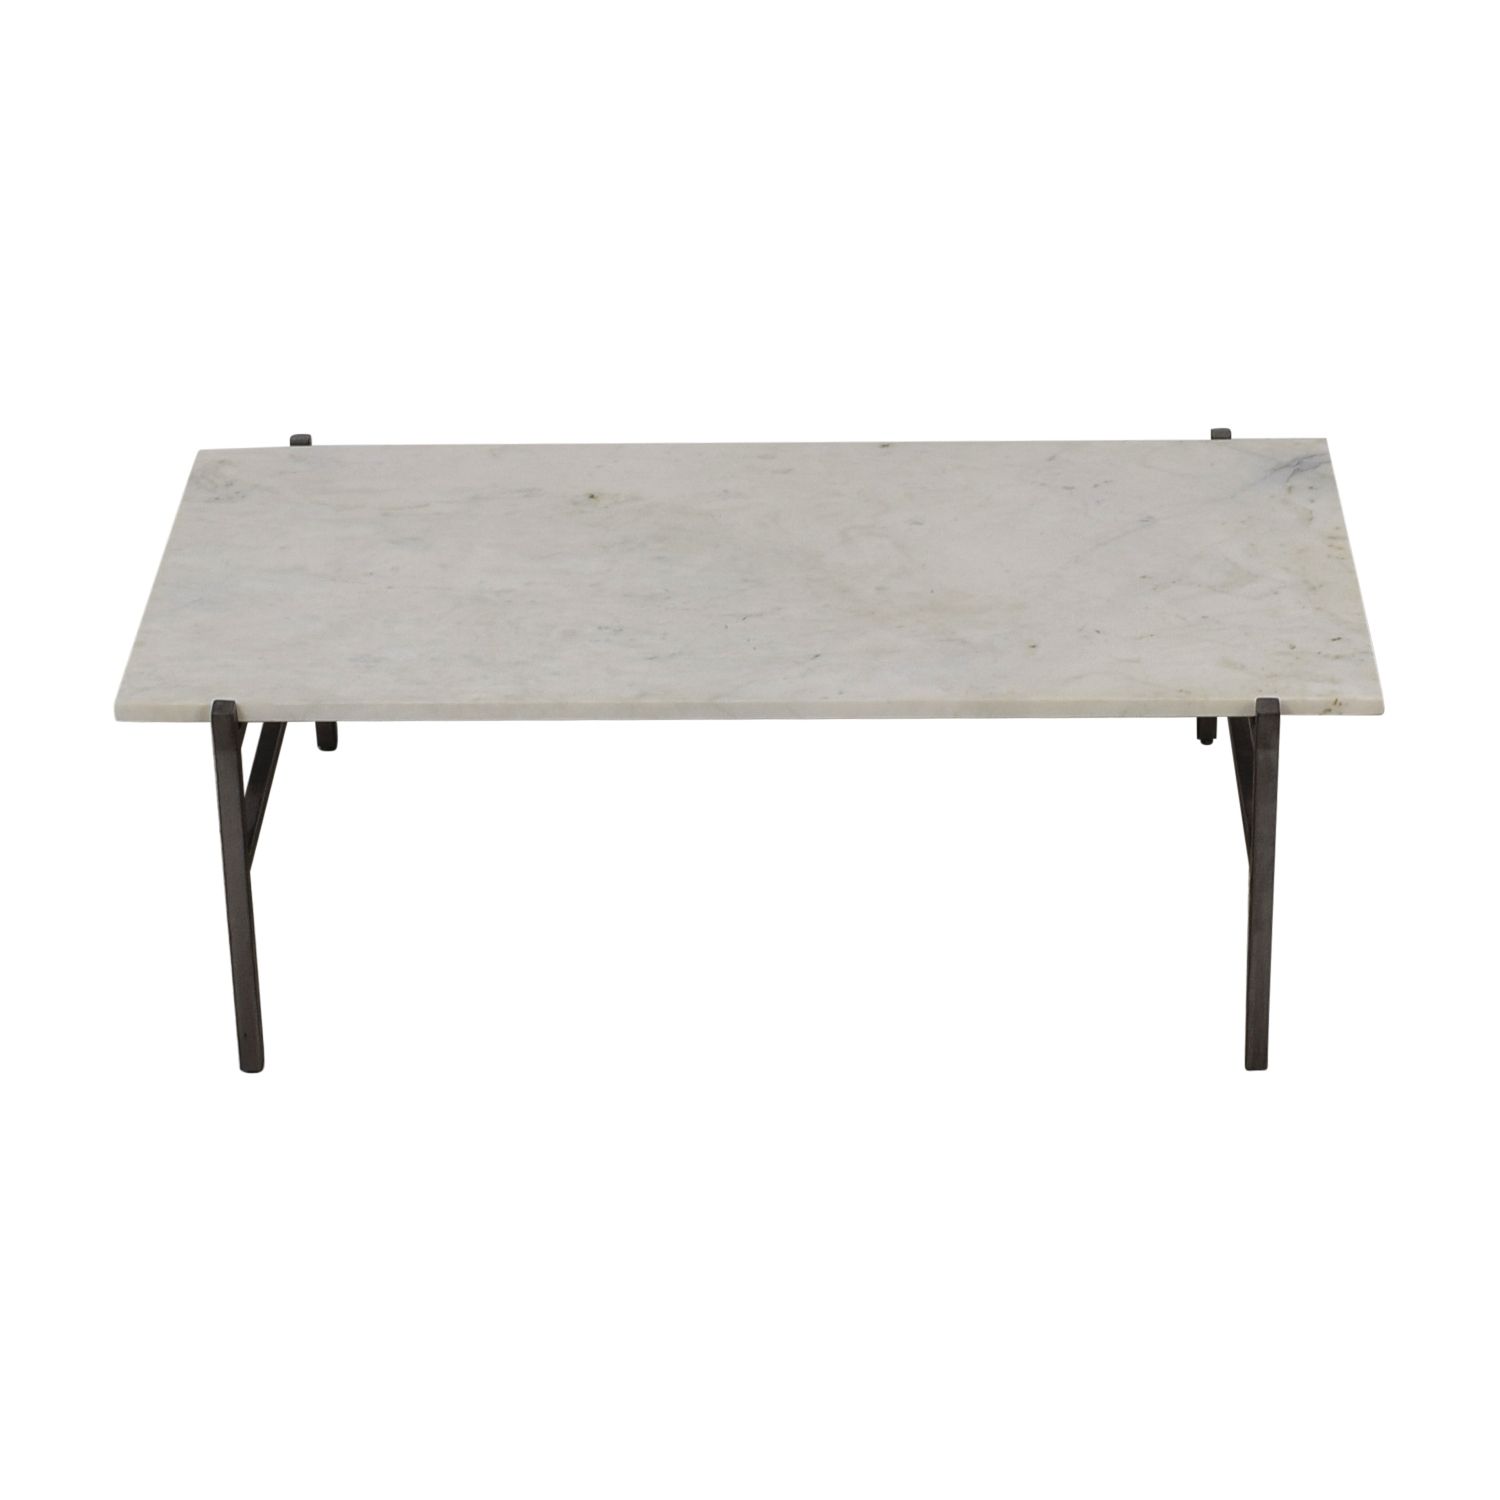 [%favorite Slab Small Marble Coffee Tables With Antiqued Silver Base Pertaining To 24% Off – Cb2 Cb2 Slab Small Marble Coffee Table With Antiqued|24% Off – Cb2 Cb2 Slab Small Marble Coffee Table With Antiqued For Popular Slab Small Marble Coffee Tables With Antiqued Silver Base%] (View 2 of 20)